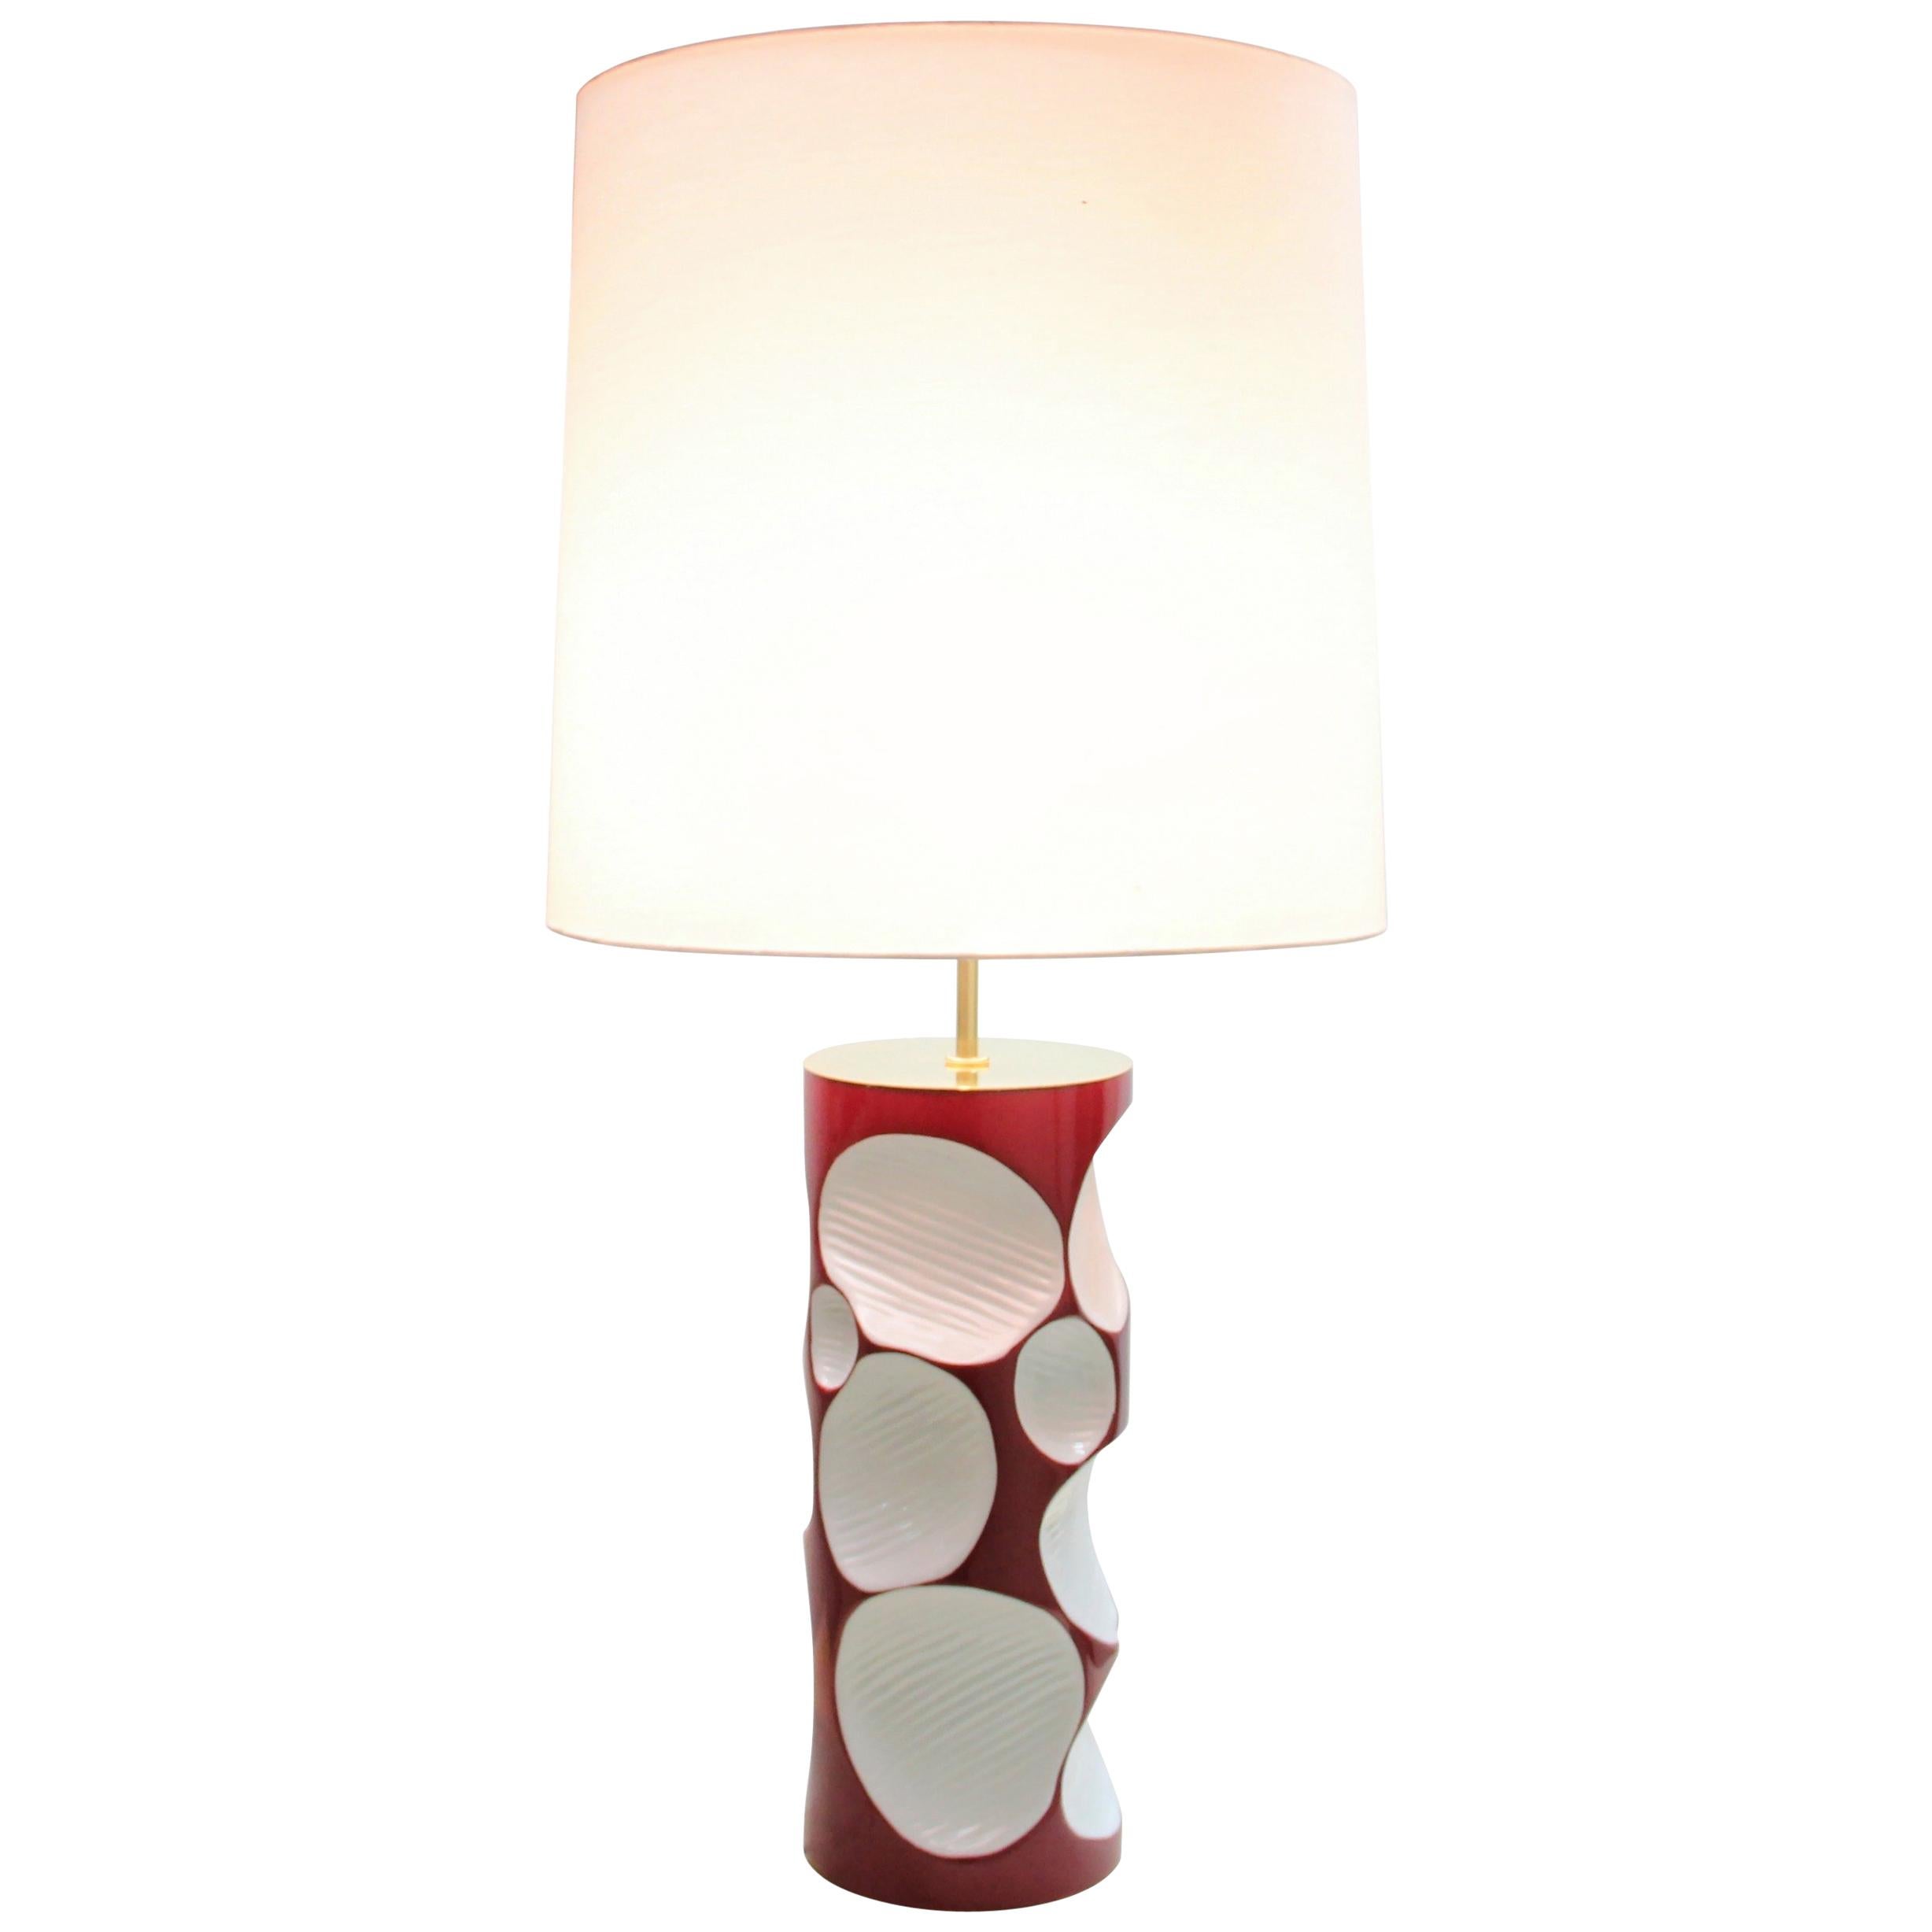 Amik Table Lamp in Red with Polished Brass Details For Sale